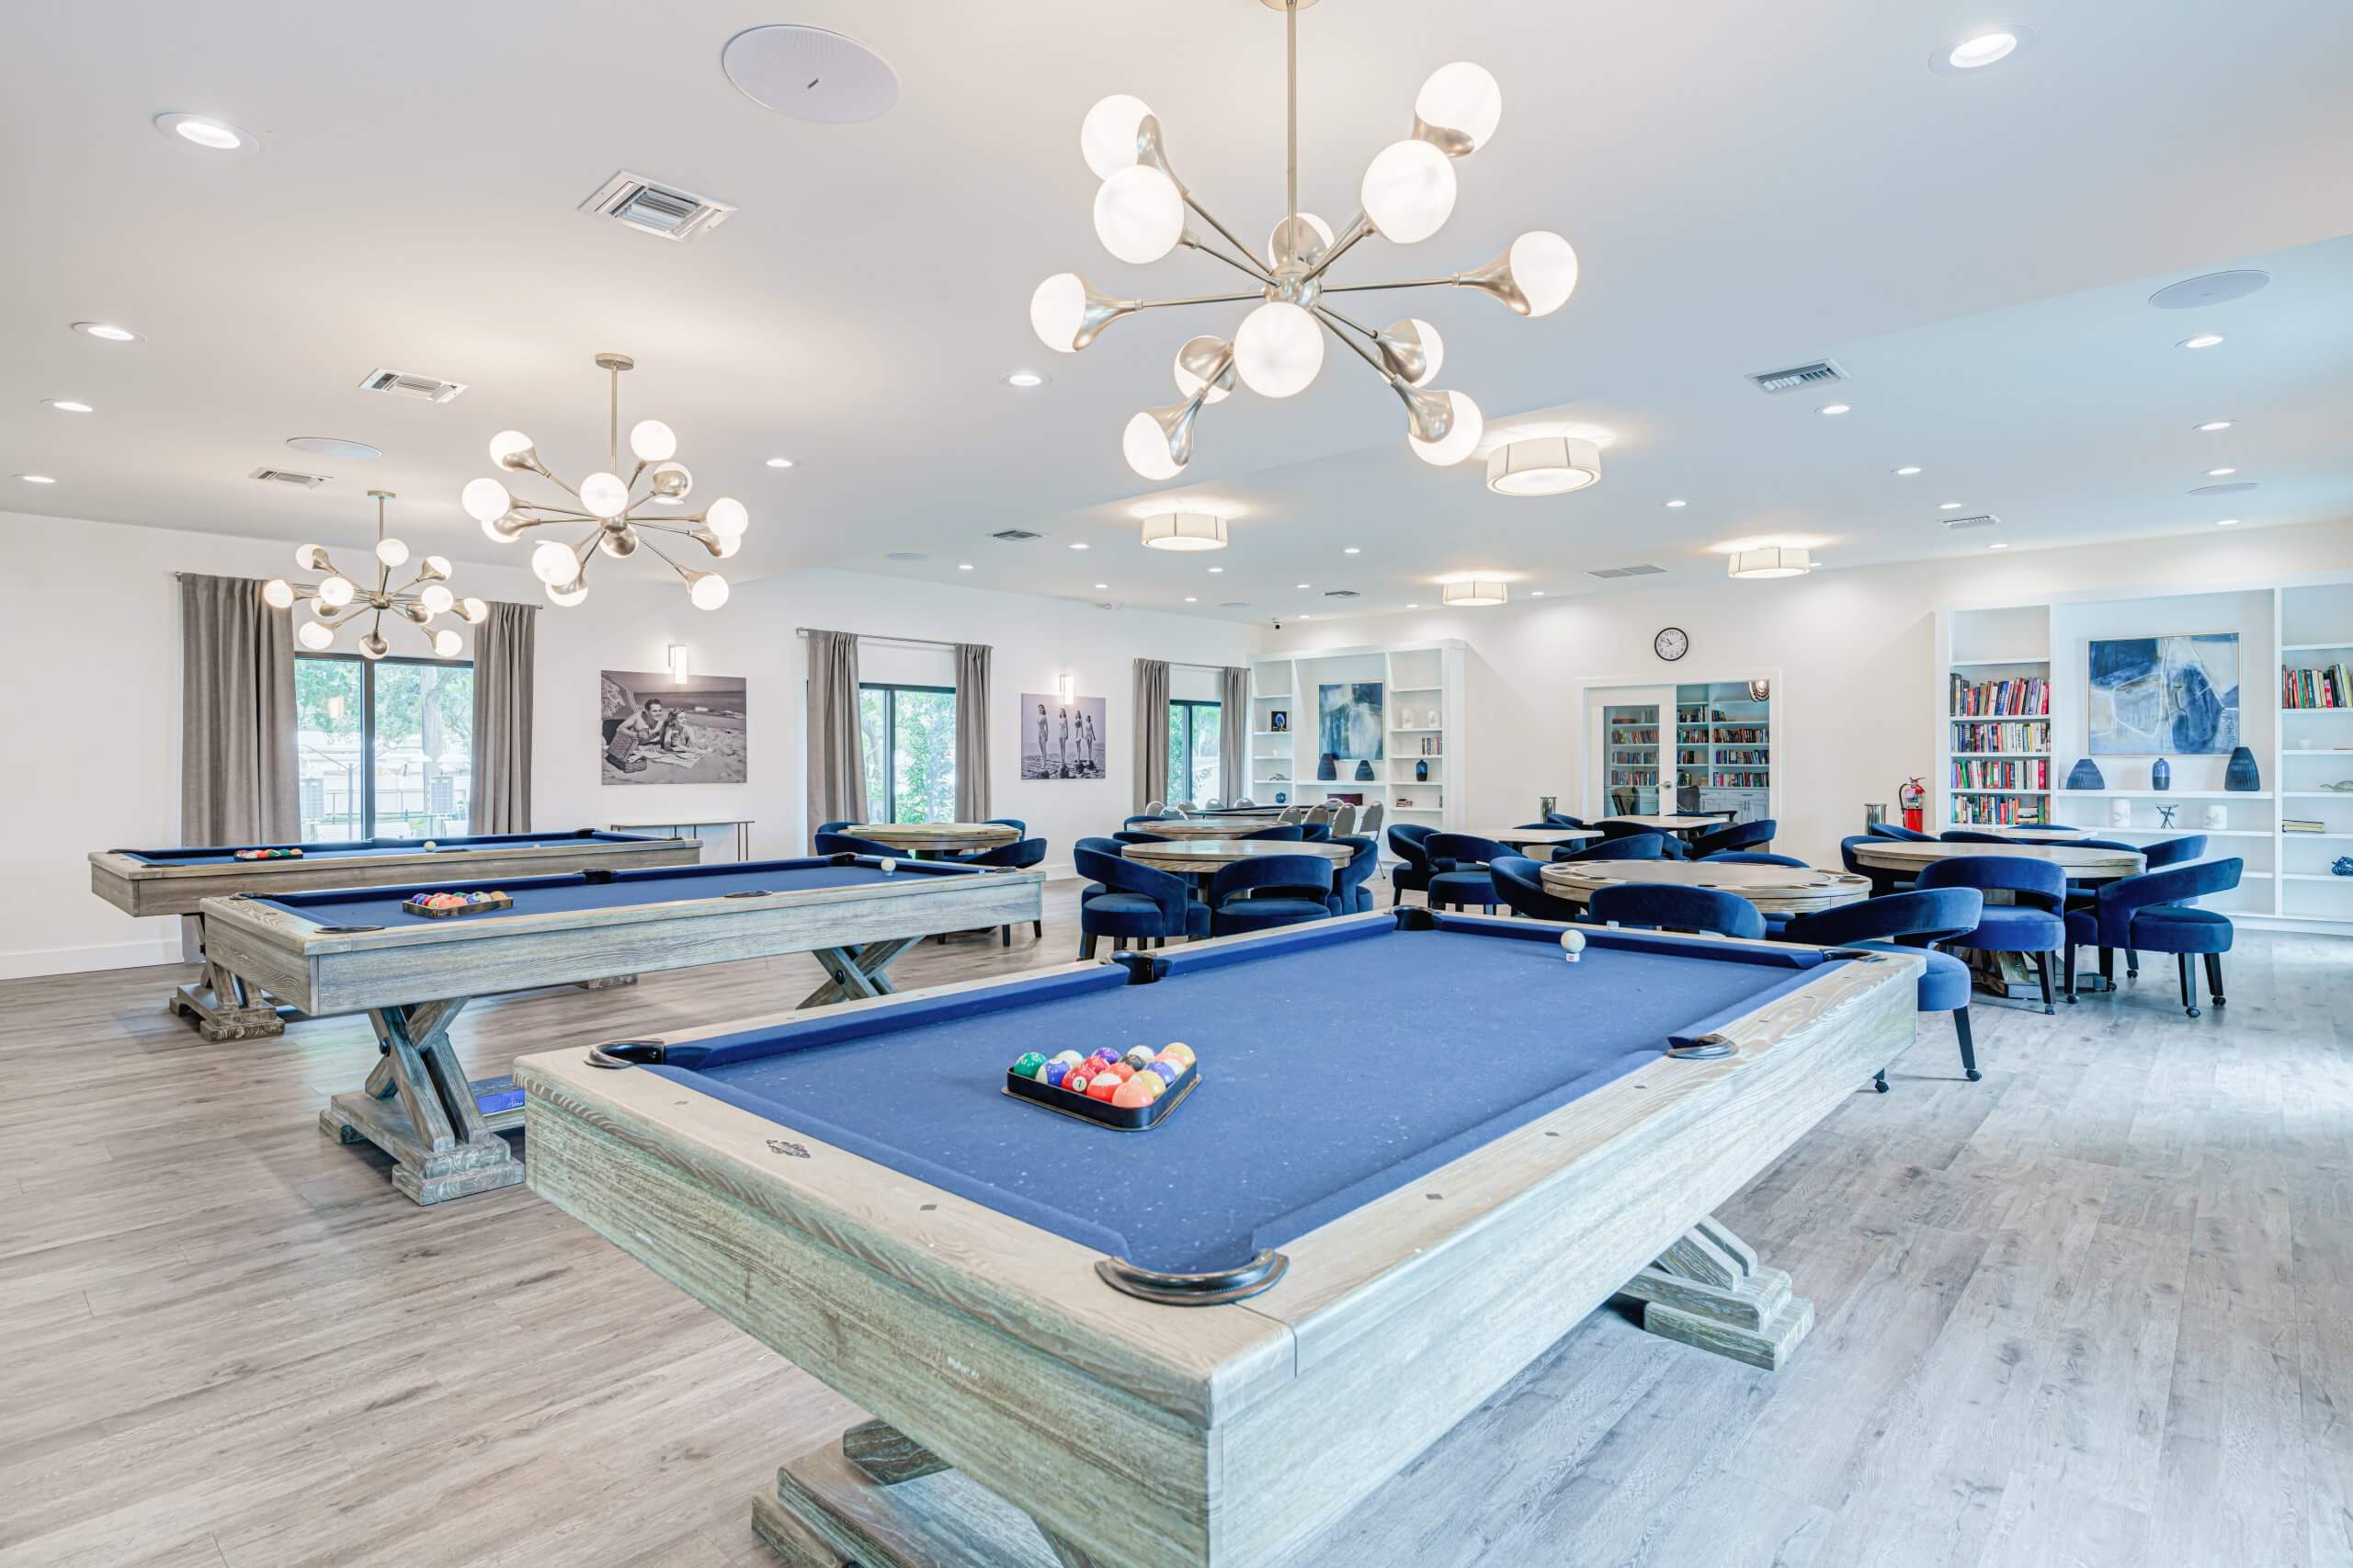 Recreational room with billiard tables, modern lighting, seating areas, and a bookshelf.